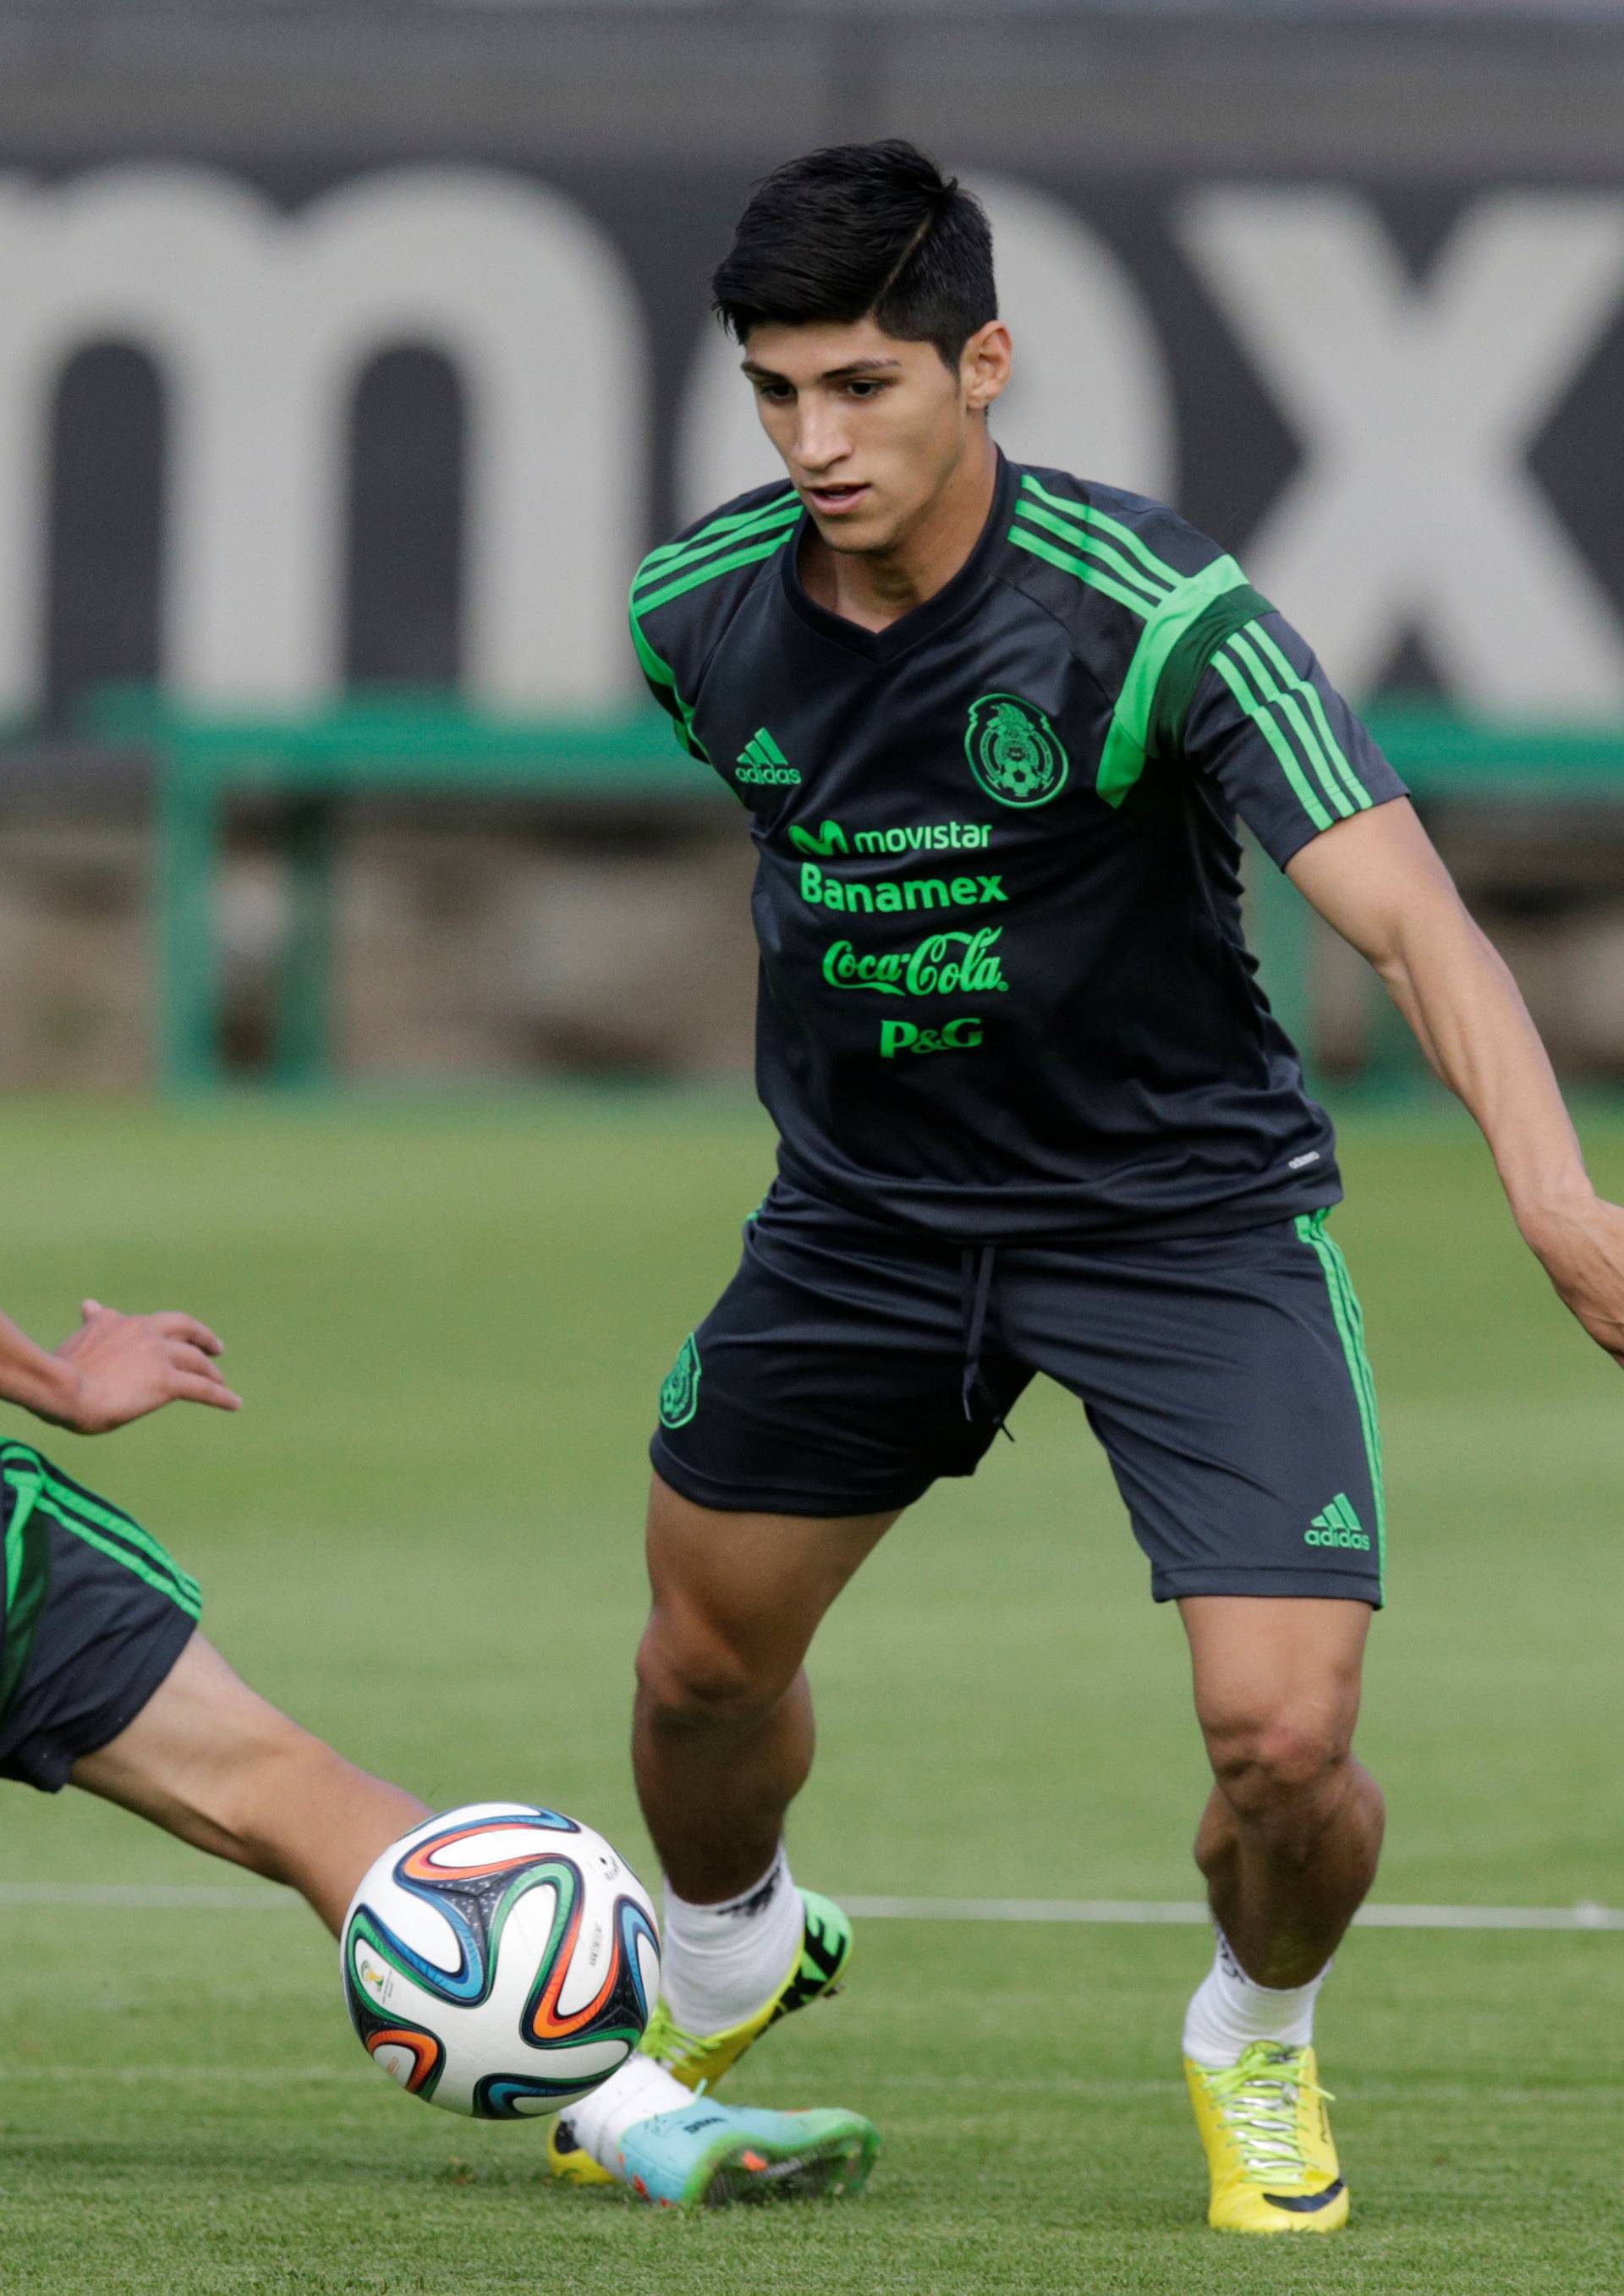 Mexico striker Pulido dribbles the ball past Aguilar during a practice session in Mexico City